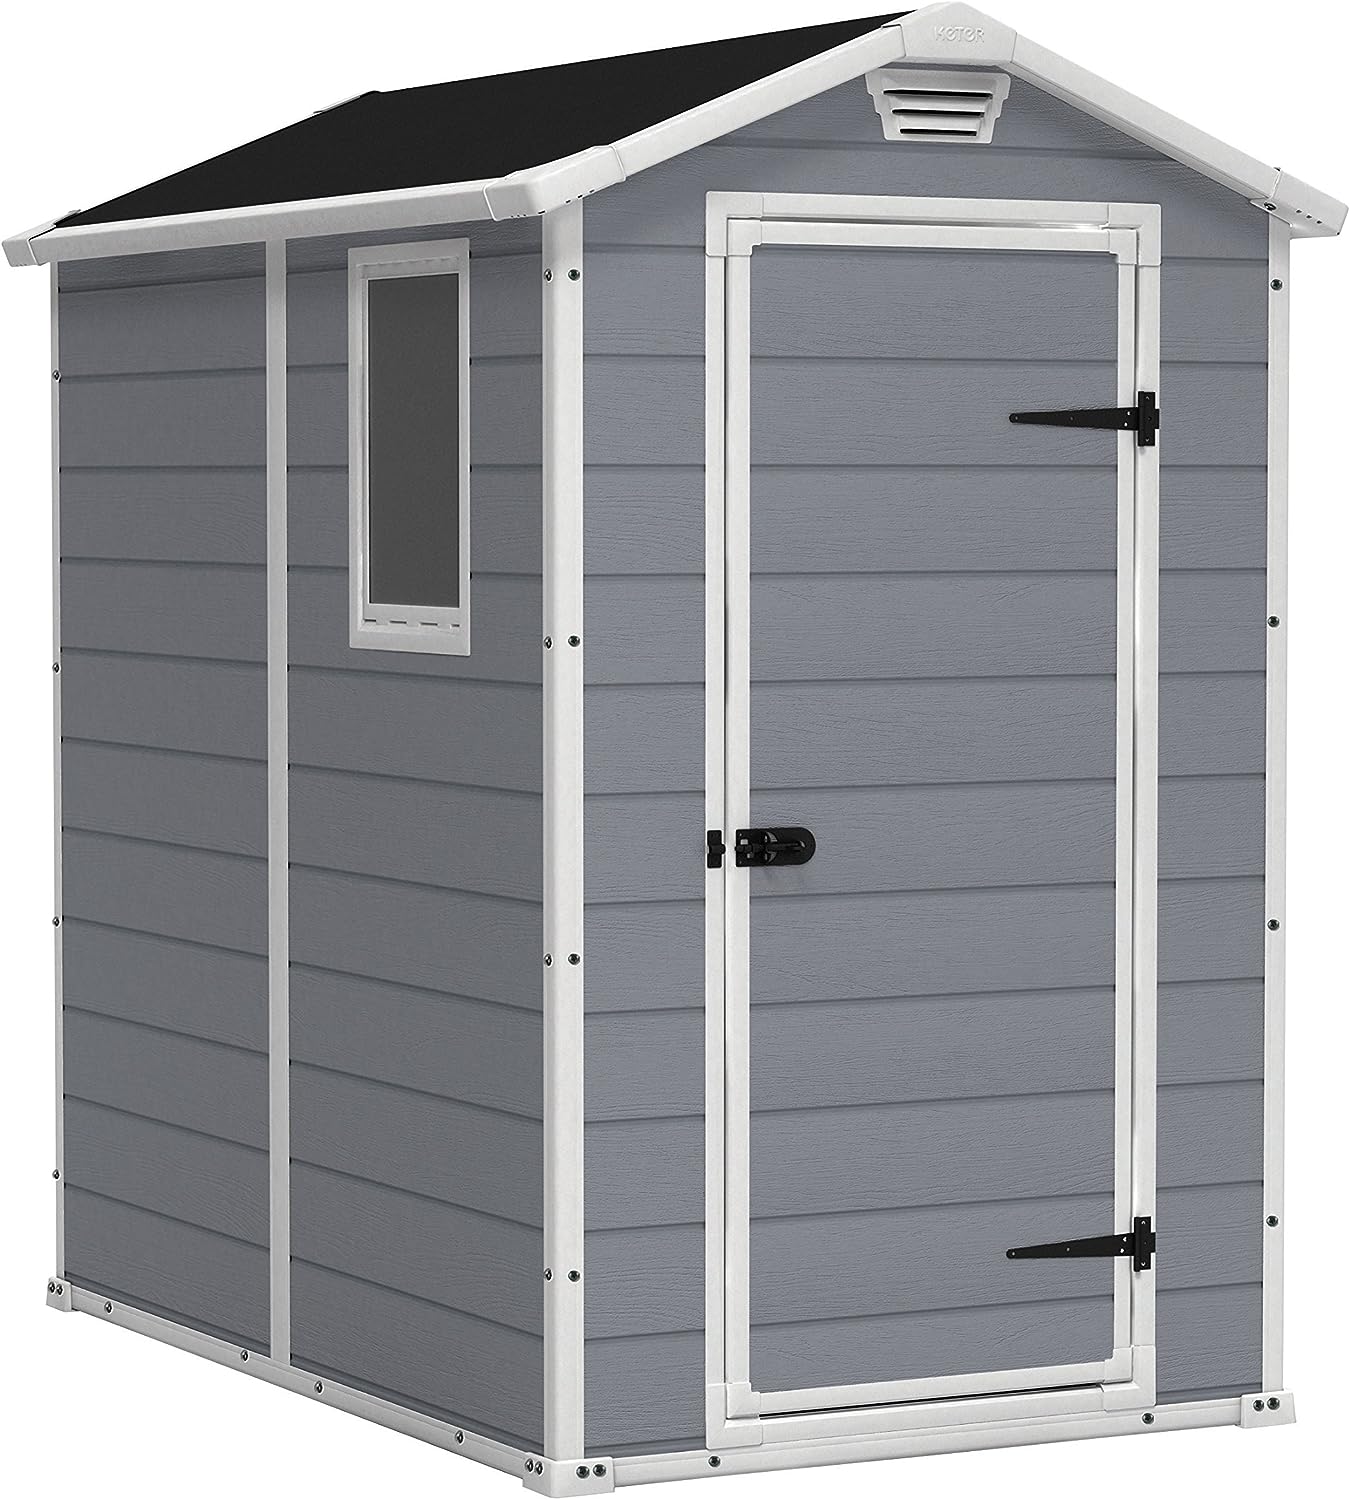 Keter Manor 4x6 Resin Outdoor Storage Shed Kit-Perfect [...]